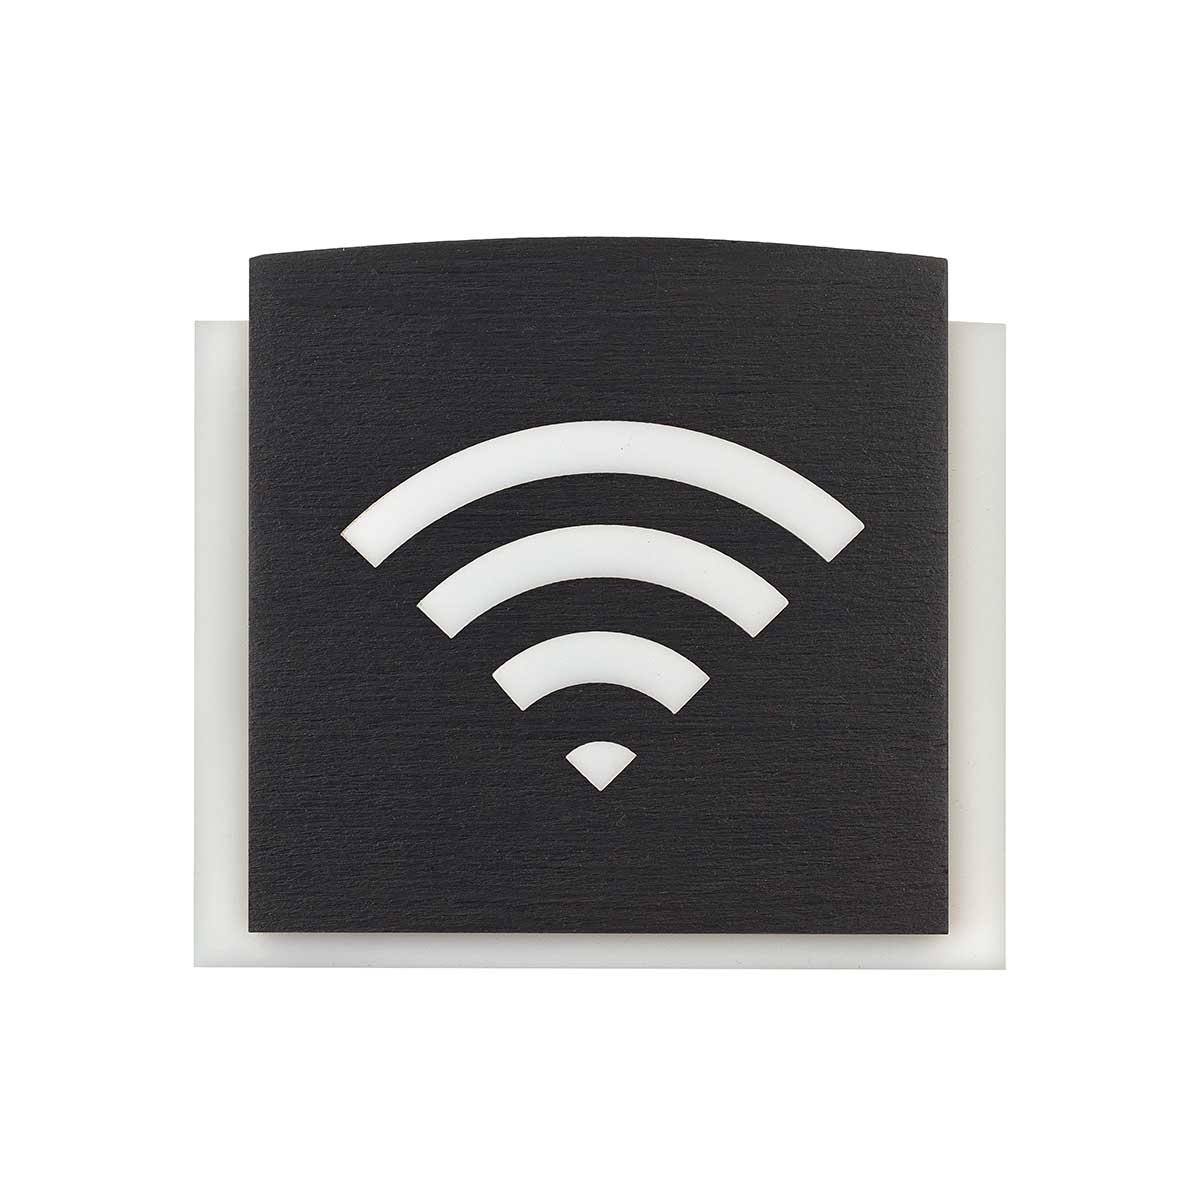 Wooden Wi-Fi Plate for Waiting Room Information signs Anthracite Gray Bsign